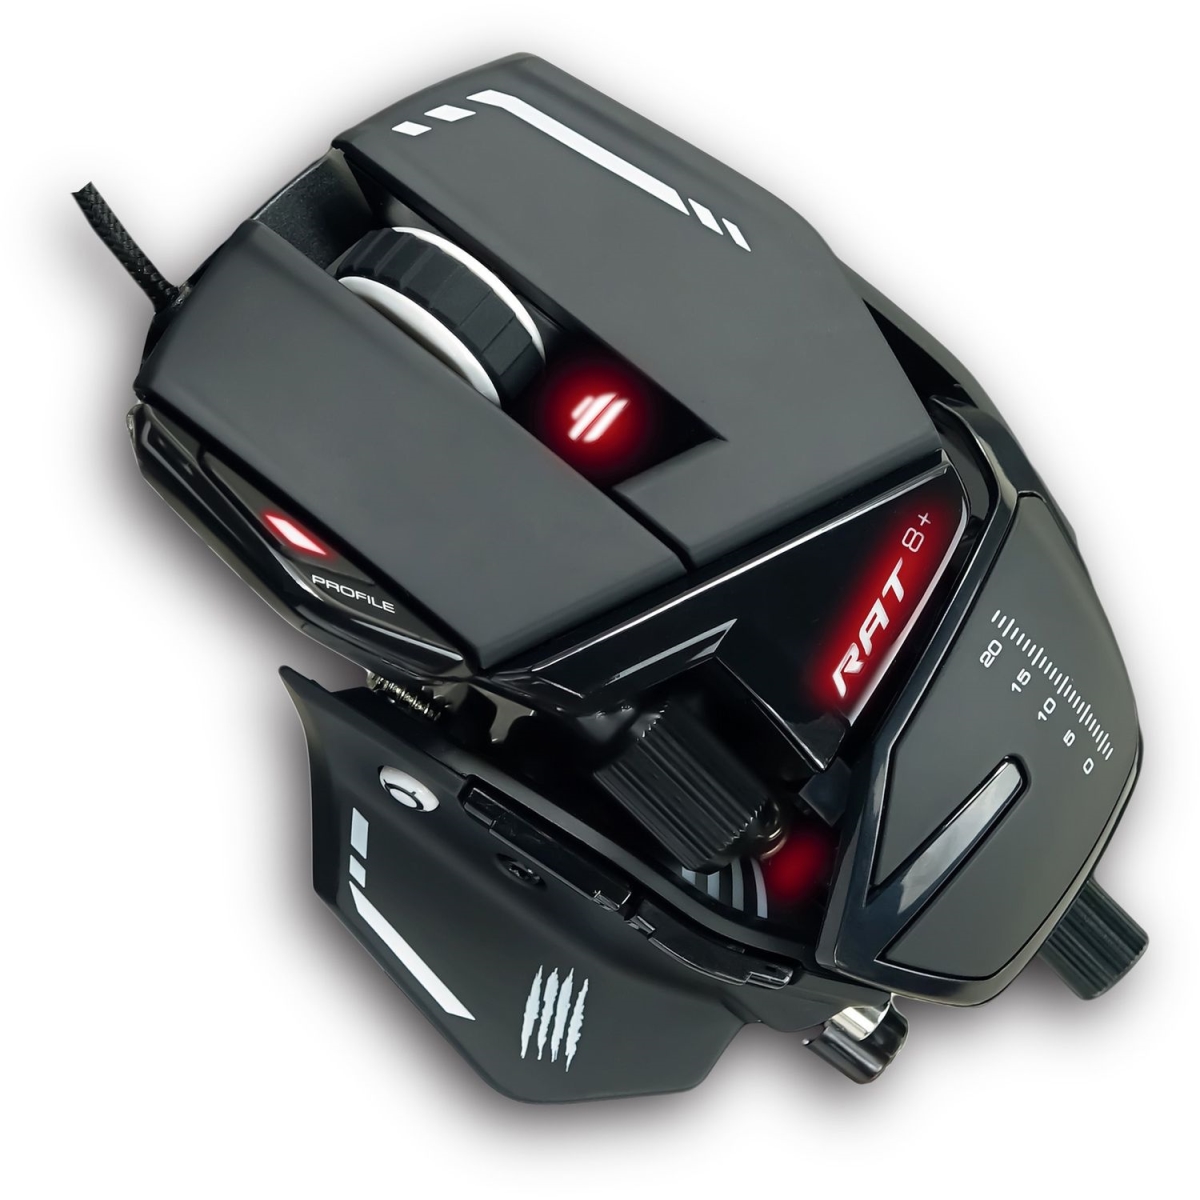 MDCMR05DCAMBL00 The Authentic R.A.T. 8 Plus Optical Gaming Mouse, Black -  Mad Catz